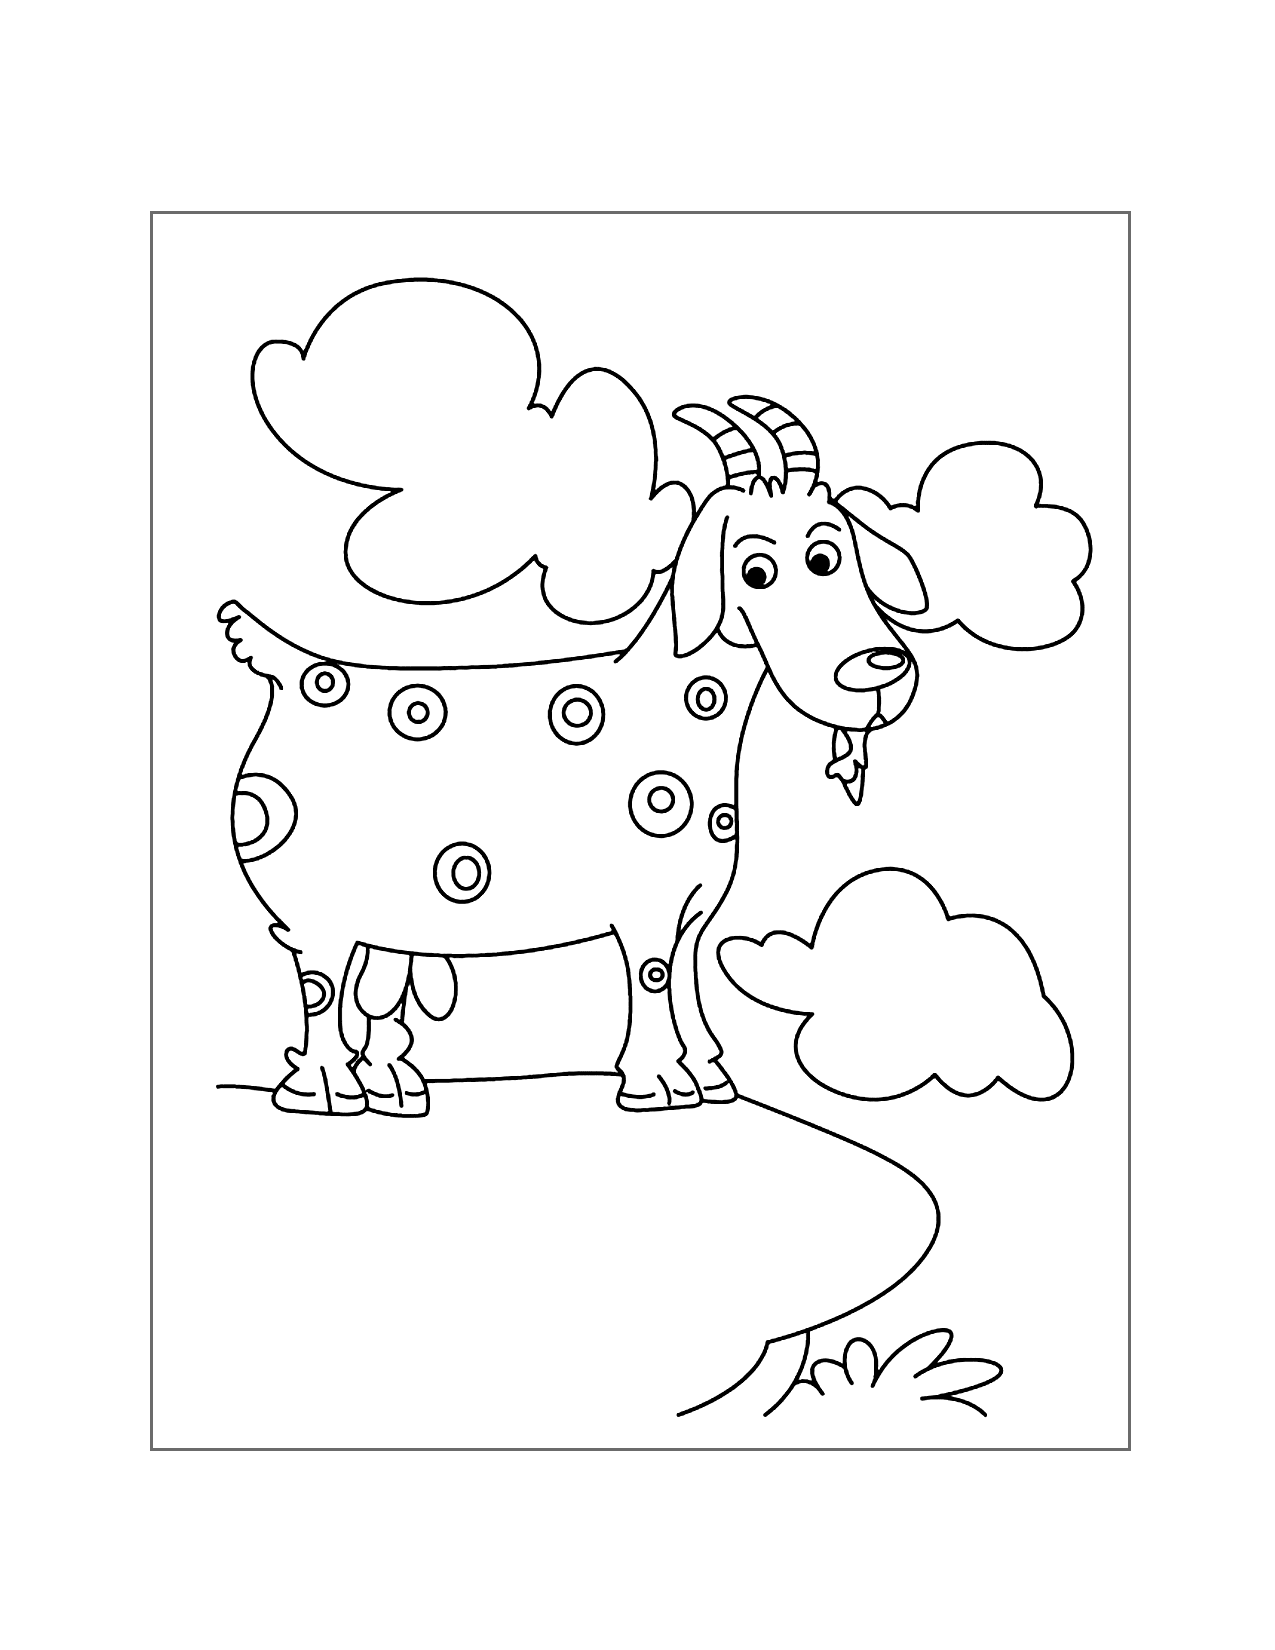 Cartoon Mountain Goat Coloring Page